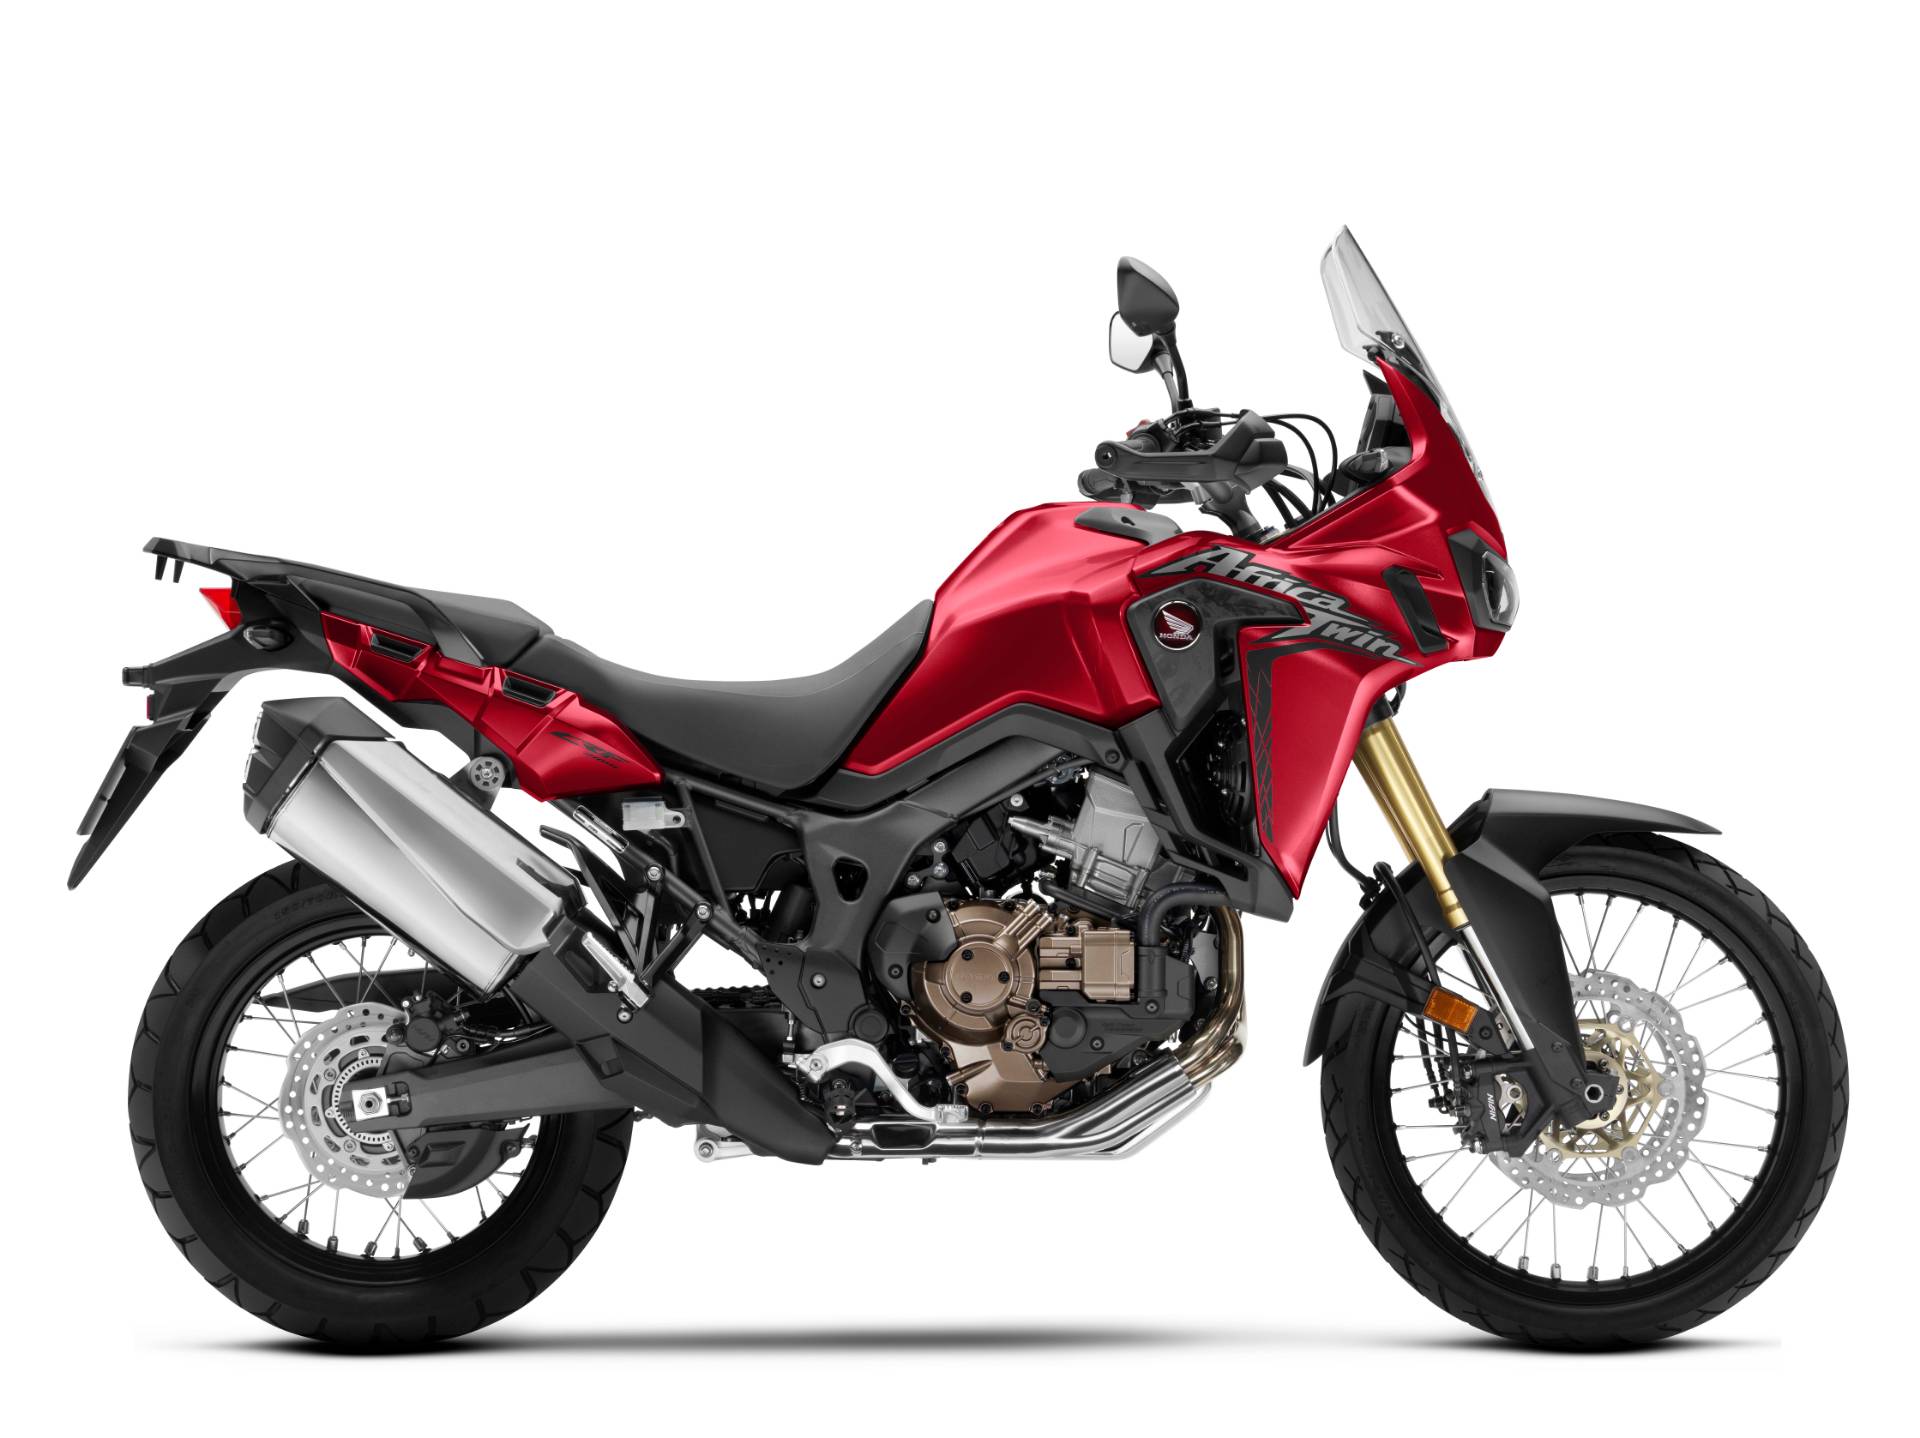 Africa twin motorcycle